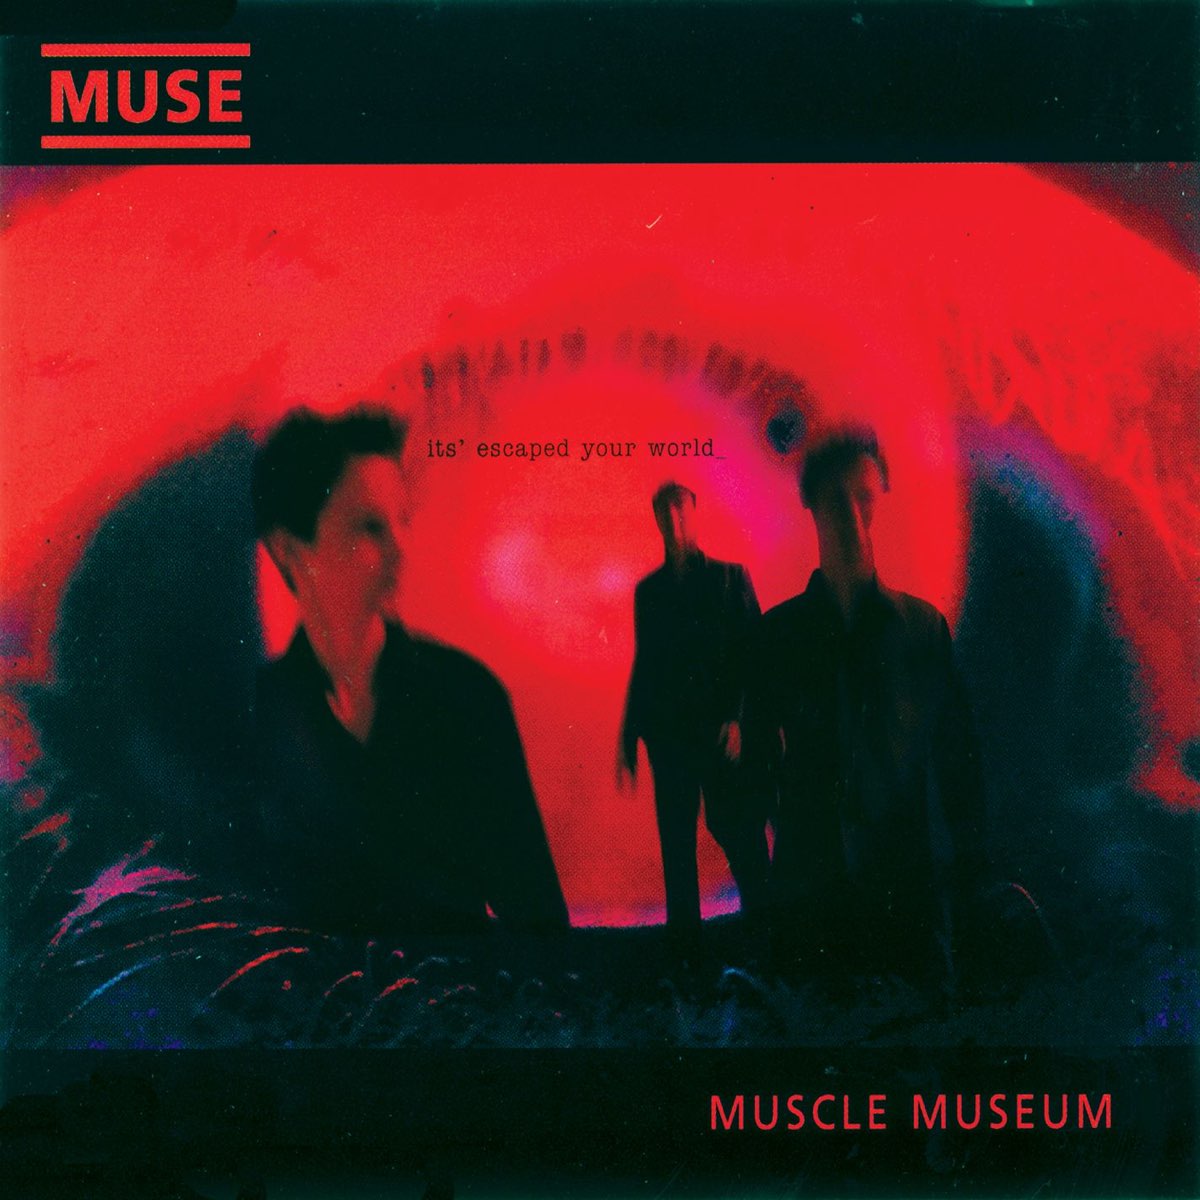 Muse — Do We Need This? cover artwork